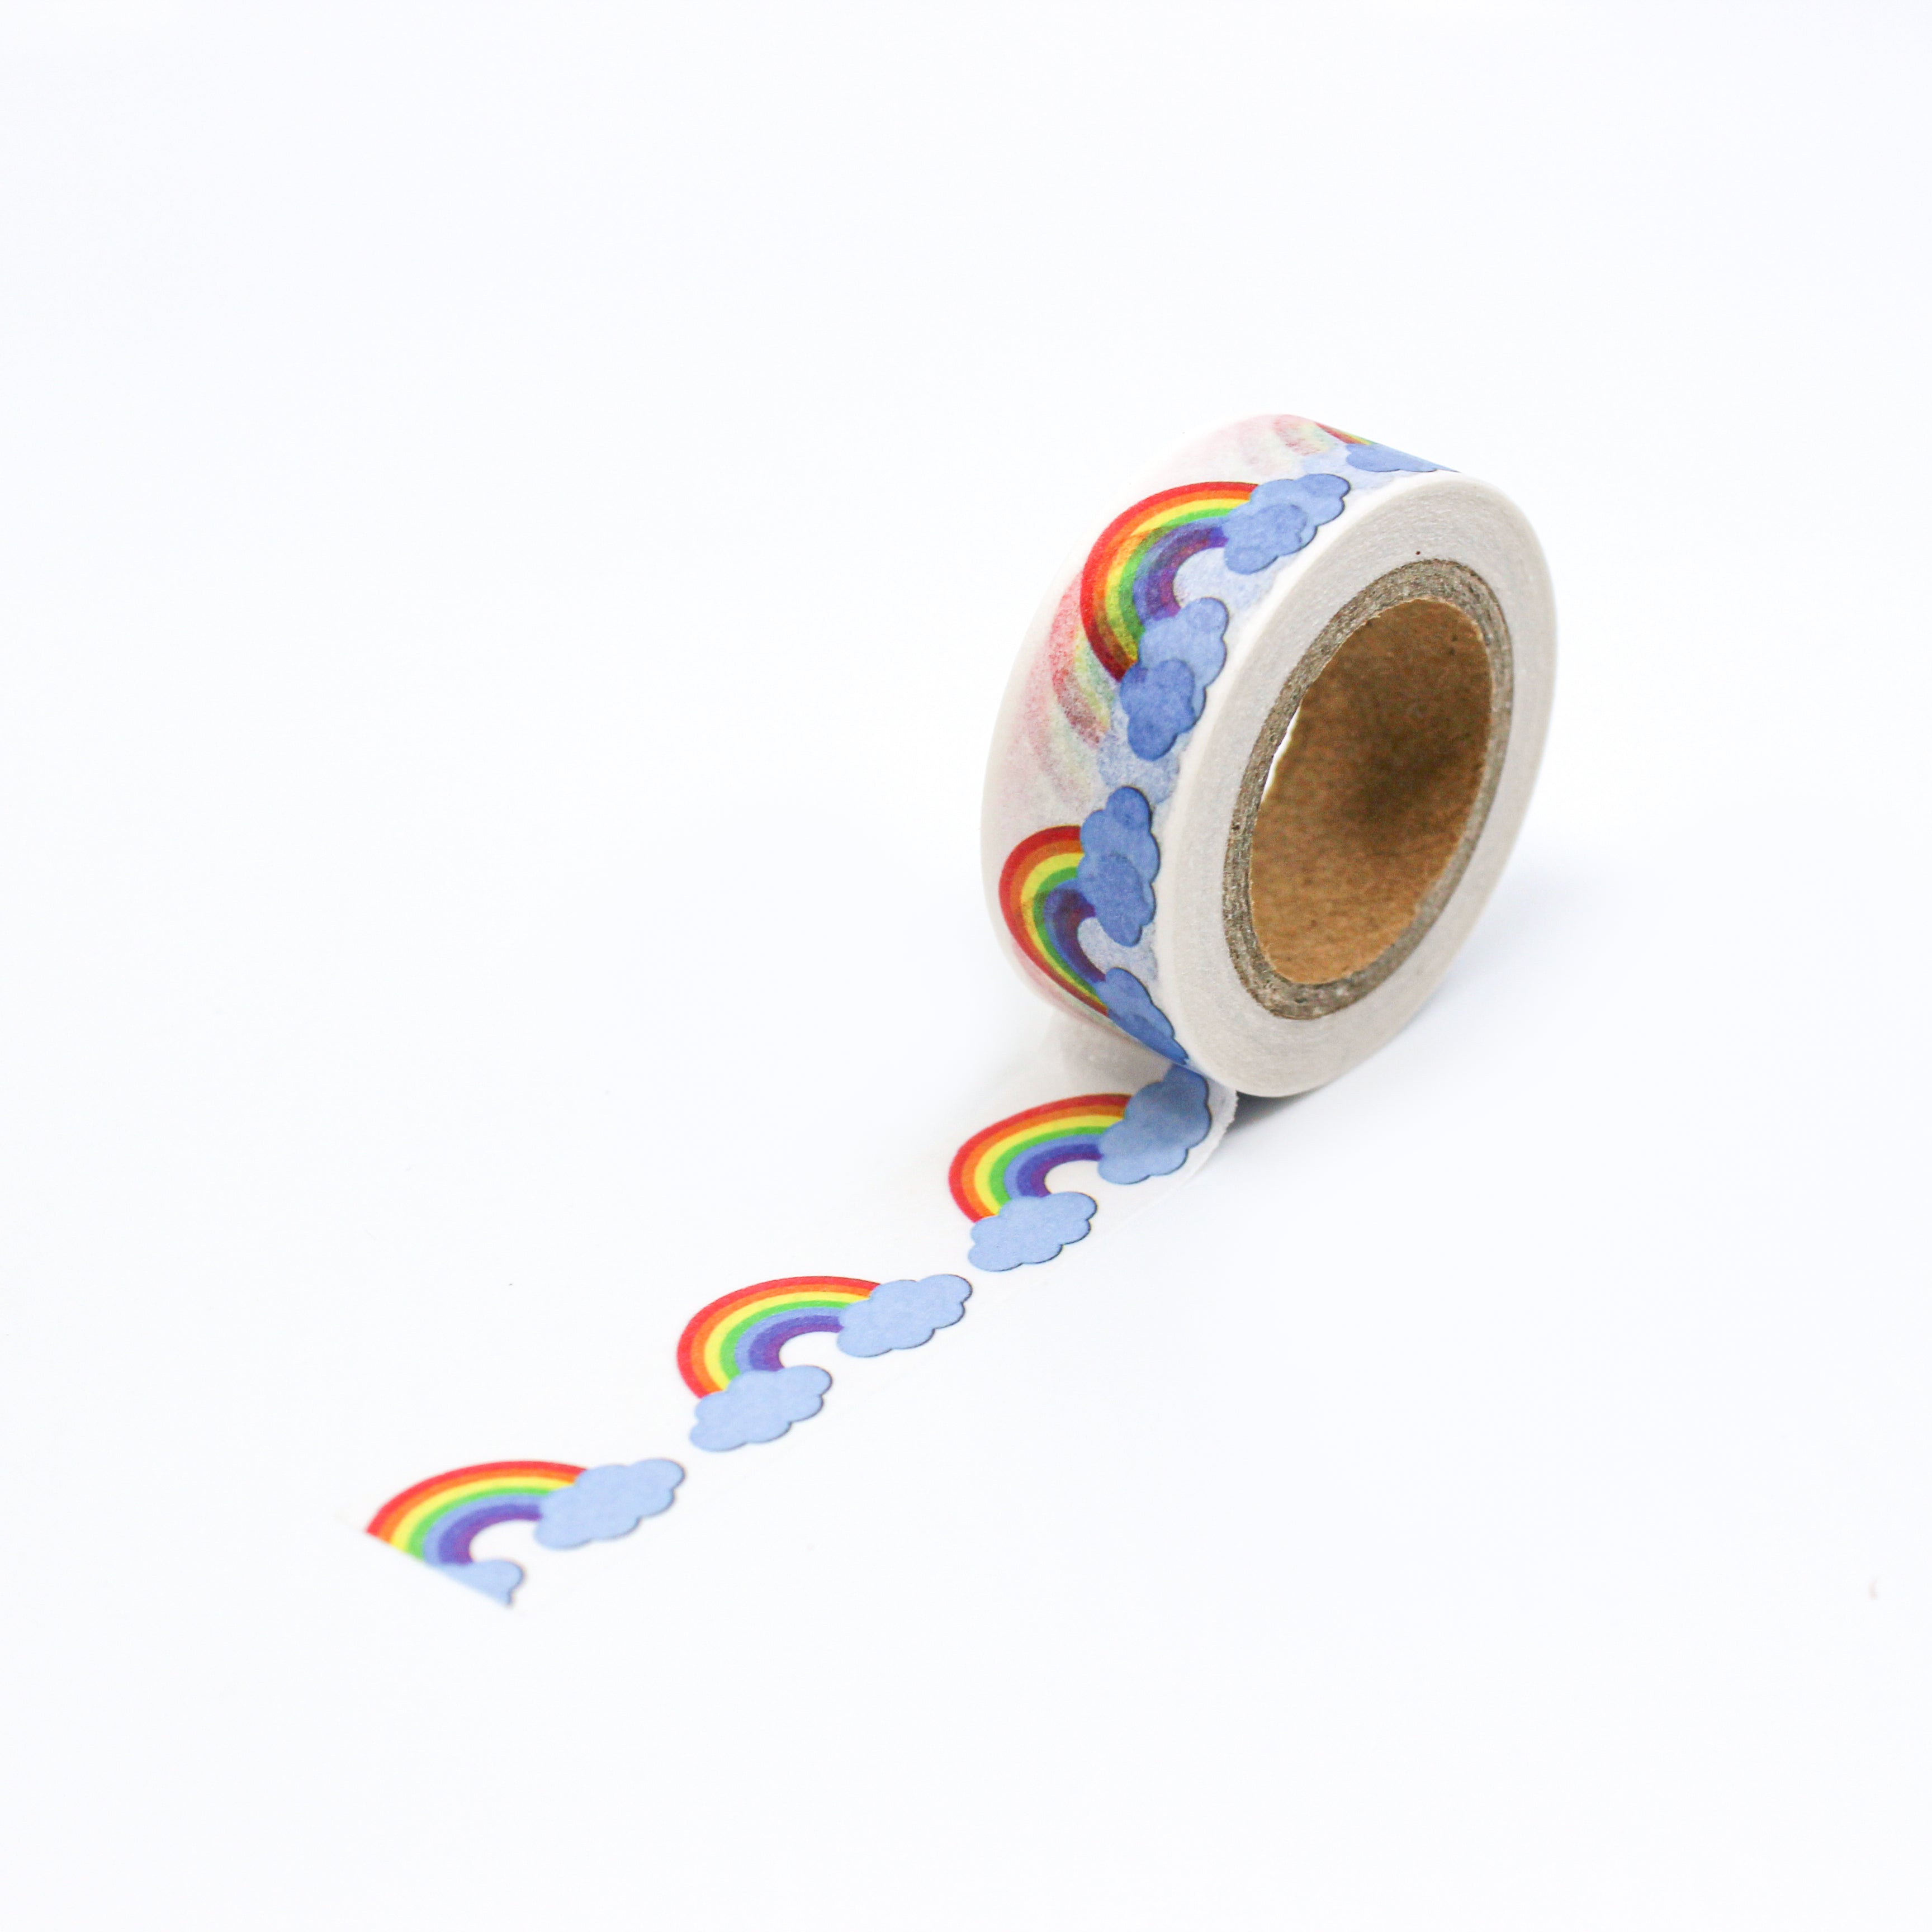 This is a full pattern repeat view of rainbow on a cloud washi tape from BBB Supplies Craft Shop